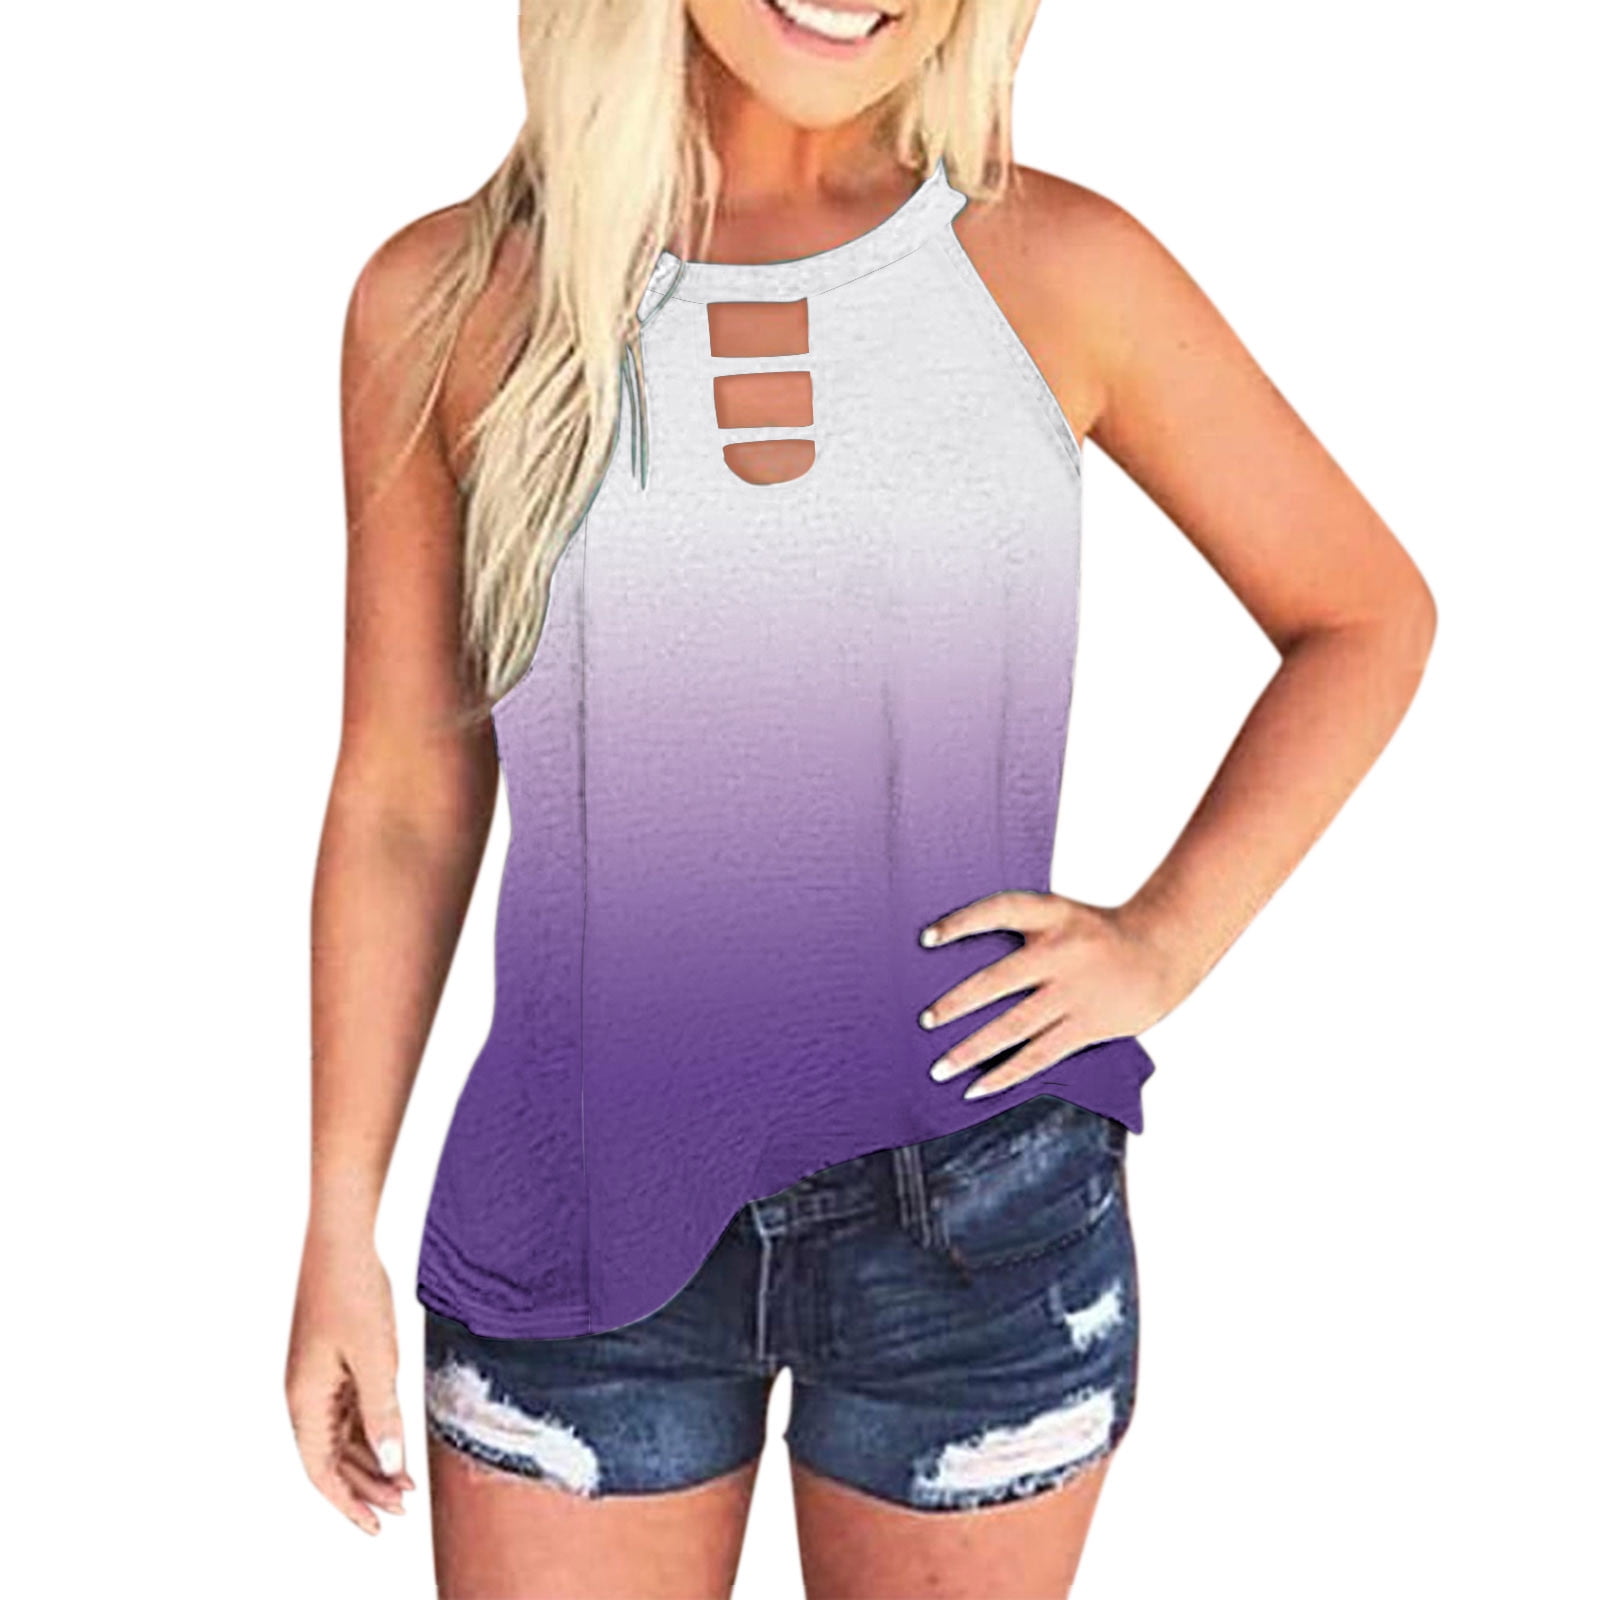 Lmtime Musical Notes Print Tank Tops Ladies Bandage Sleeveless Vest Top Strappy Blouse 